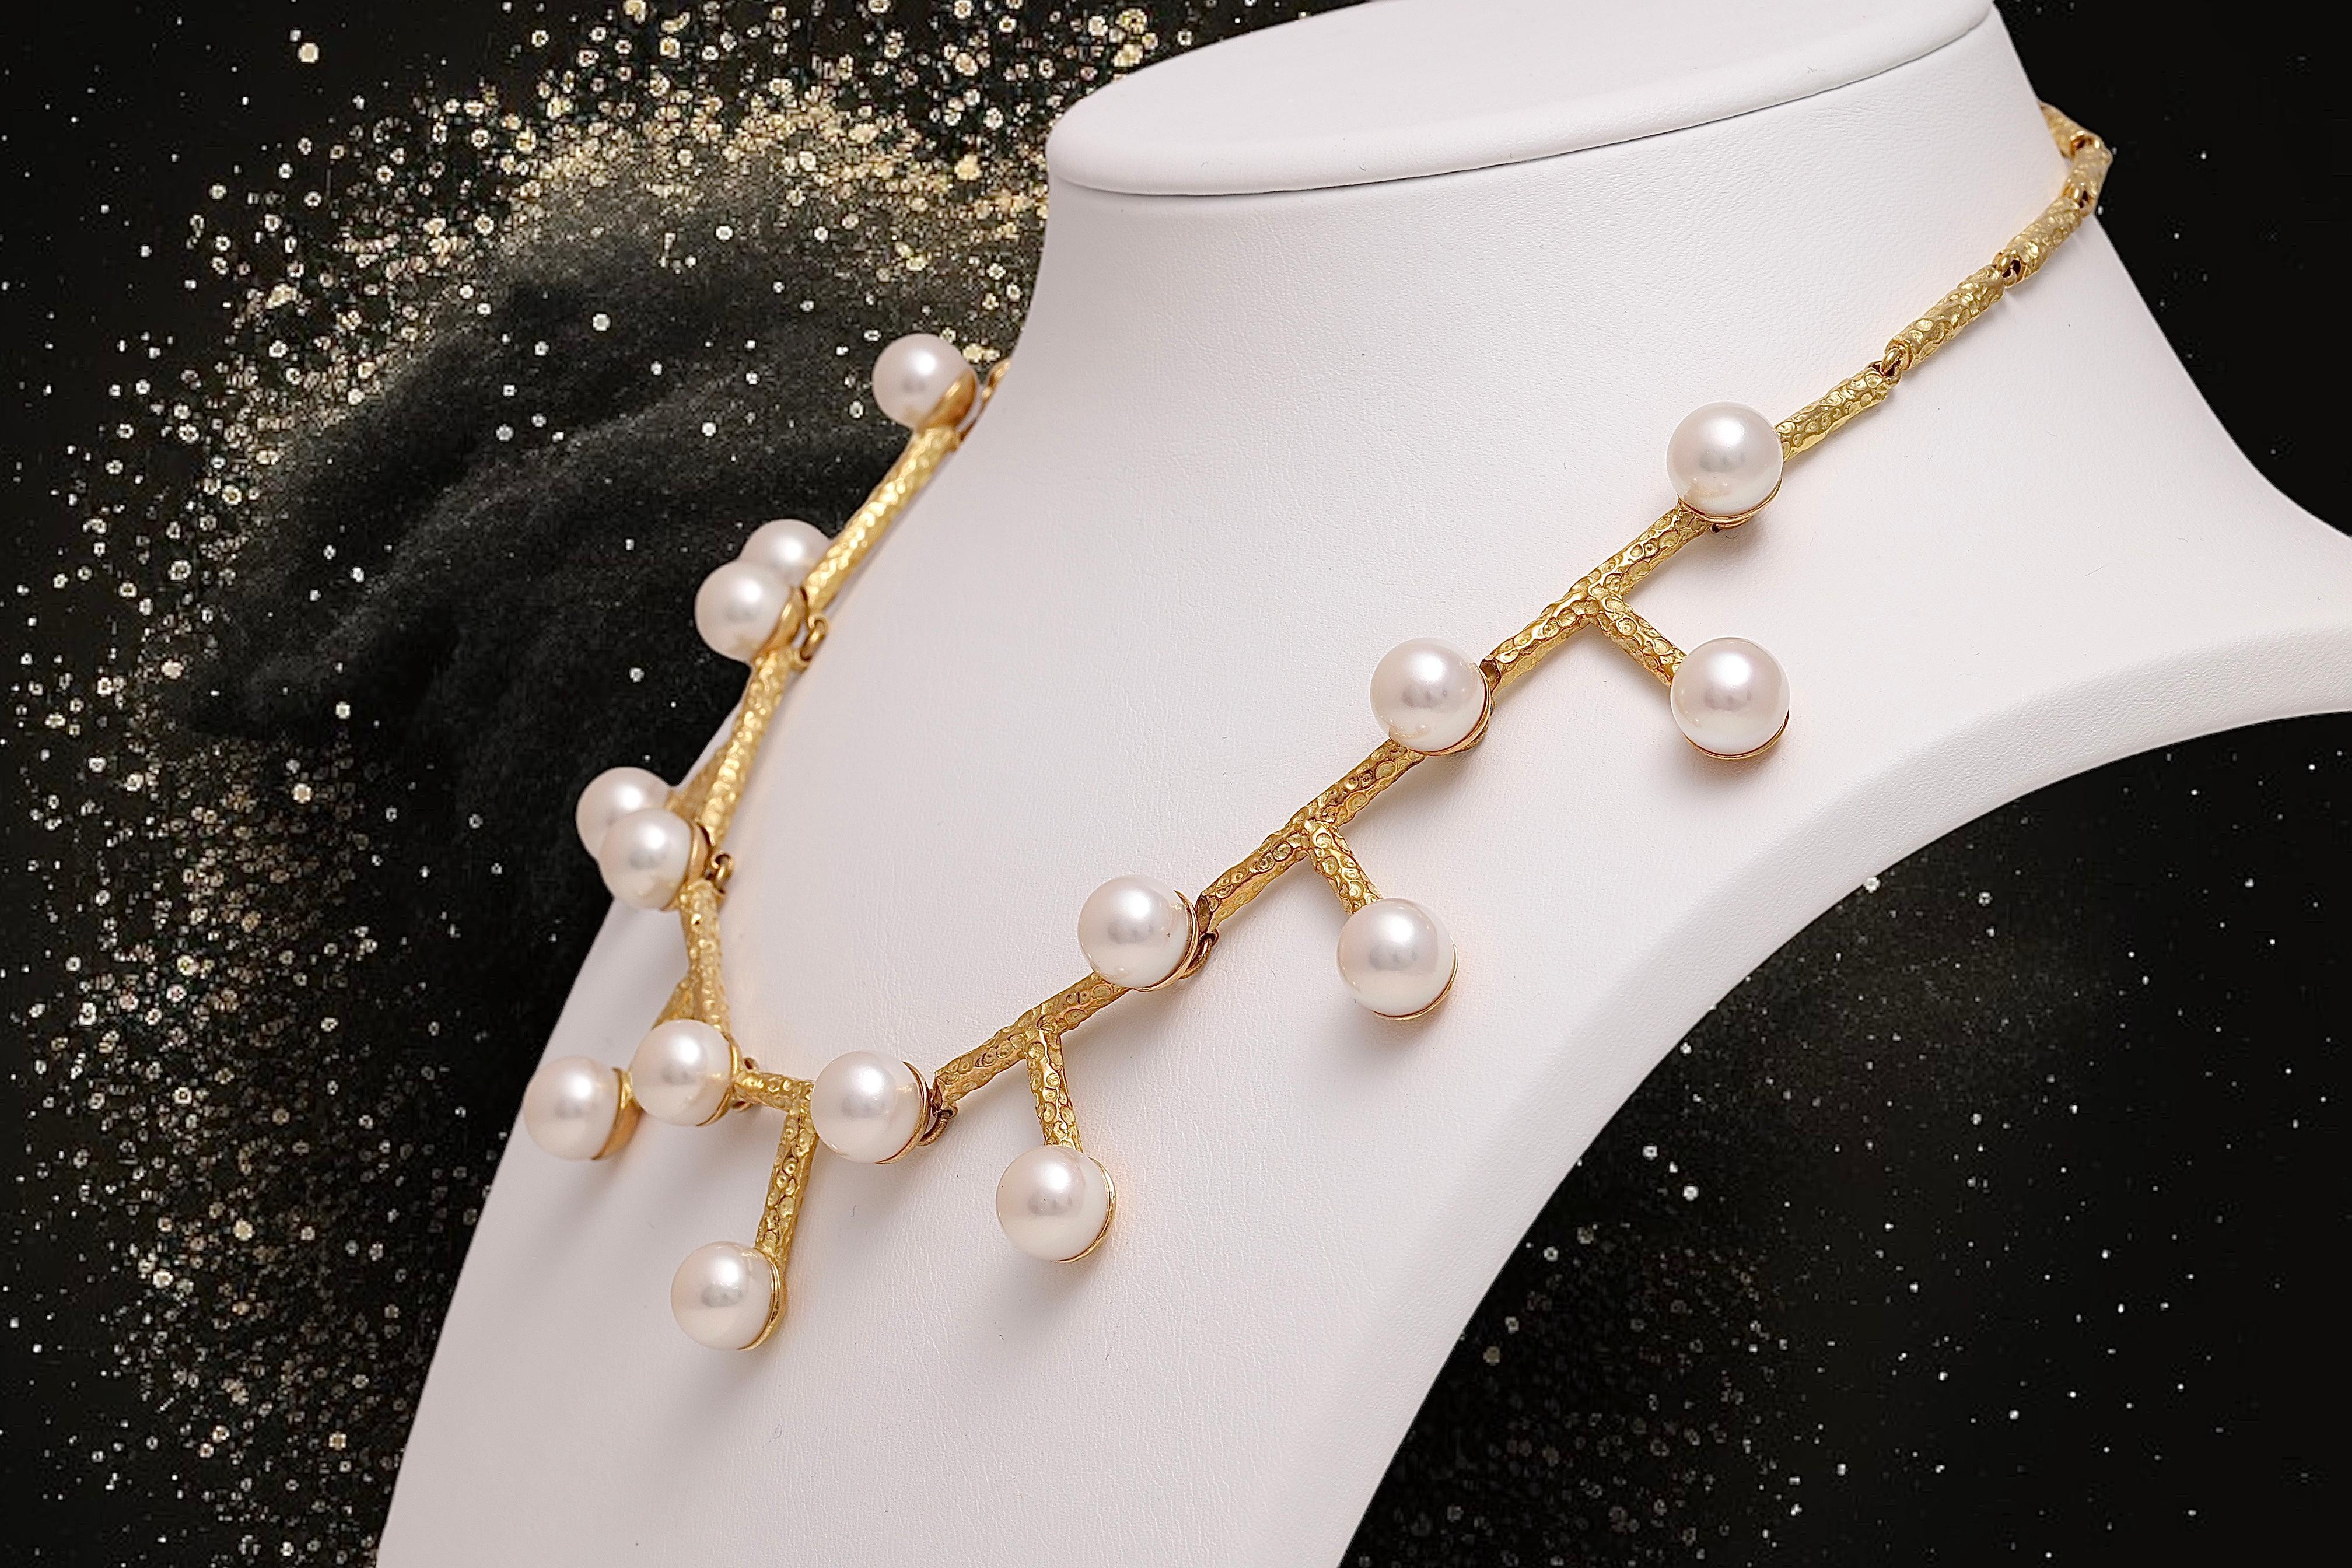 Very Original 18kt Yellow Gold Necklace by J.P. De Saedeleer with Pearls For Sale 5